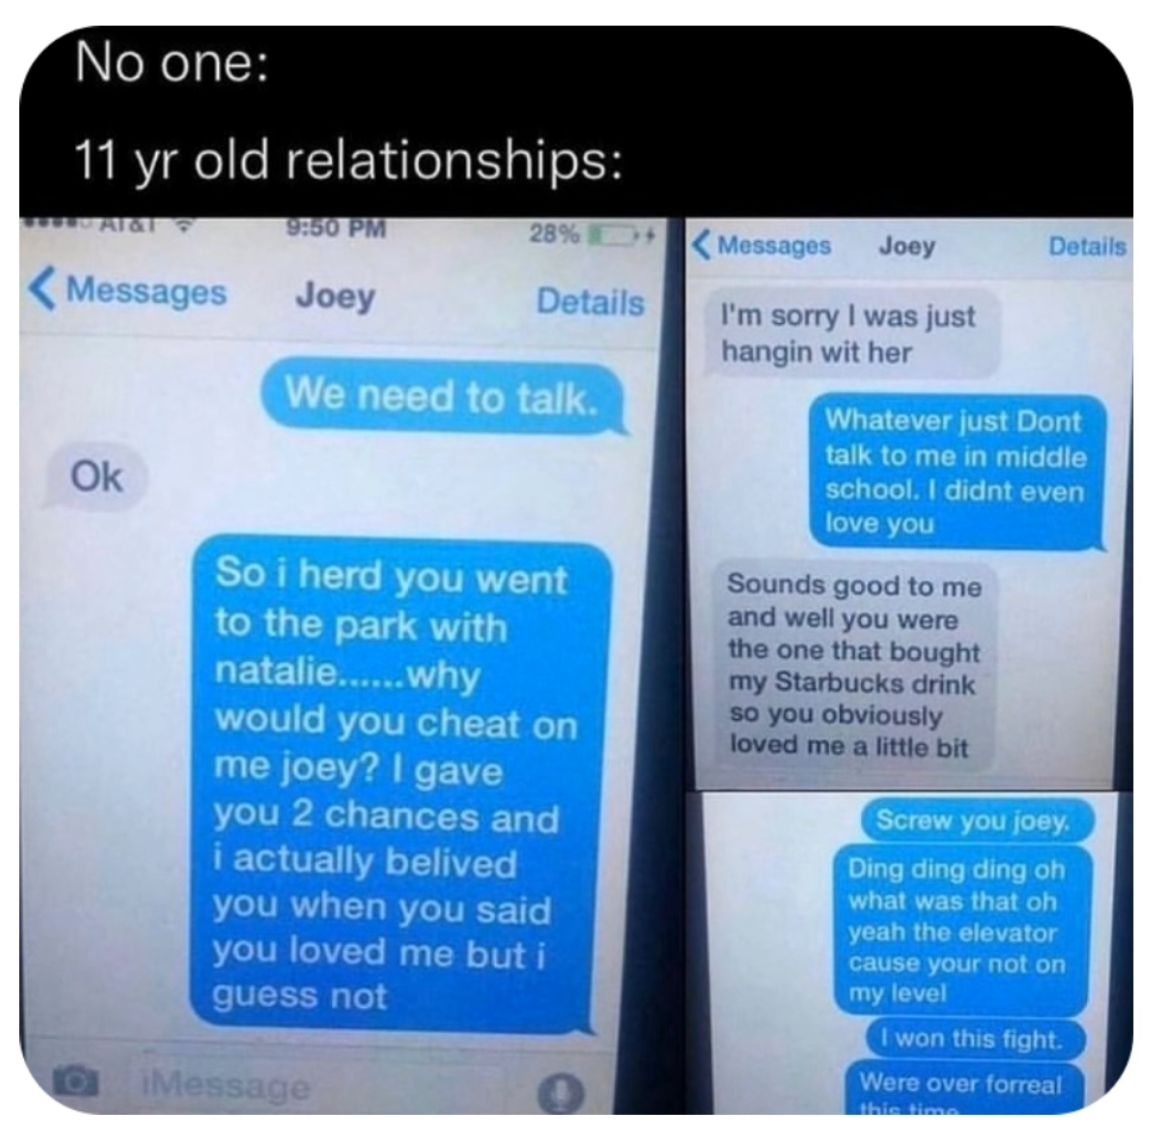 No one:
11 yr old relationships:
Messages
Ok
9:50 PM
28%
Joey
We need to talk.
iMessage
Details
So i herd you went
to the park with
natalie......why
would you cheat on
me joey? I gave
you 2 chances and
i actually belived
you when you said
you loved me but i
guess not
Messages Joey
I'm sorry I was just
hangin wit her
Details
Whatever just Dont
talk to me in middle
school. I didnt even
love you
Sounds good to me
and well you were
the one that bought
my Starbucks drink
so you obviously
loved me a little bit
Screw you joey.
Ding ding ding oh
what was that oh
yeah the elevator
cause your not on
my level
I won this fight.
Were over forreal
this time